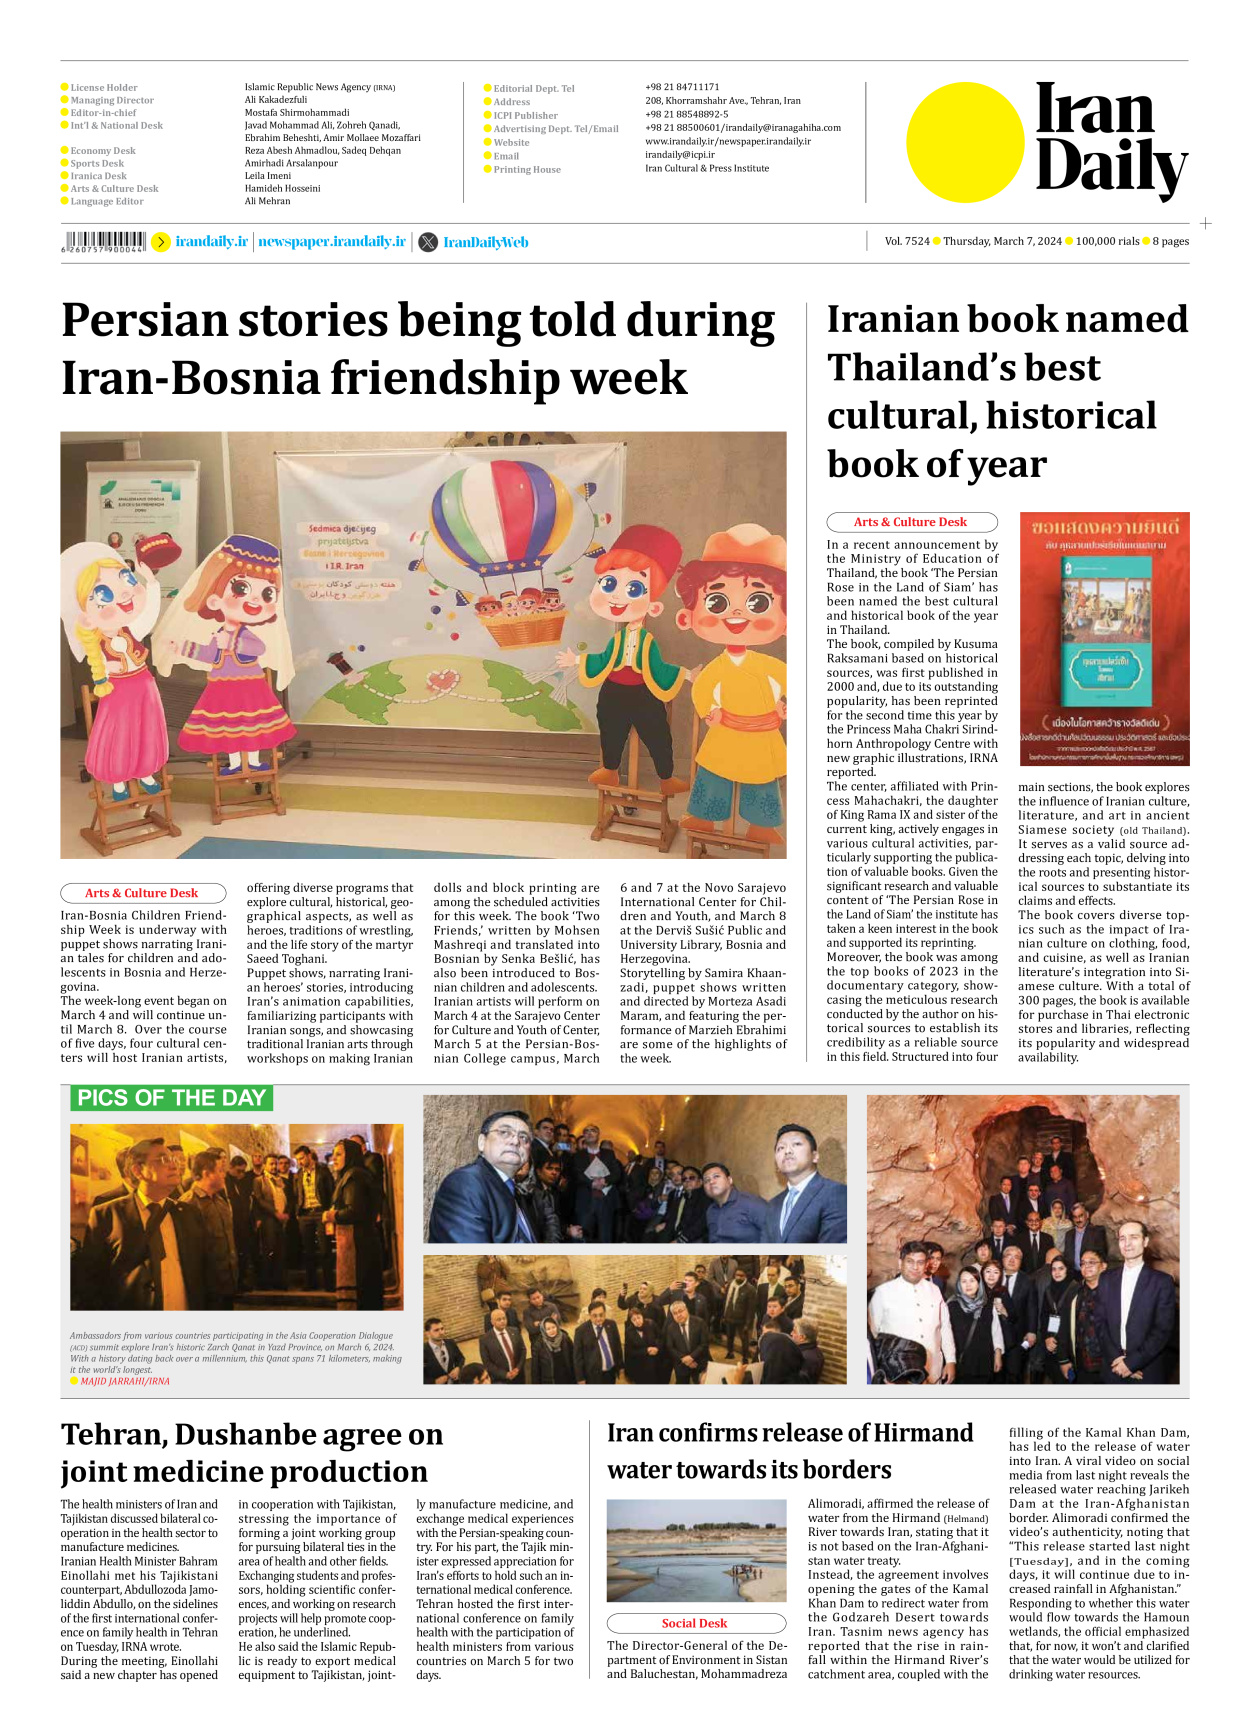 Iran Daily - Number Seven Thousand Five Hundred and Twenty Four - 07 March 2024 - Page 8